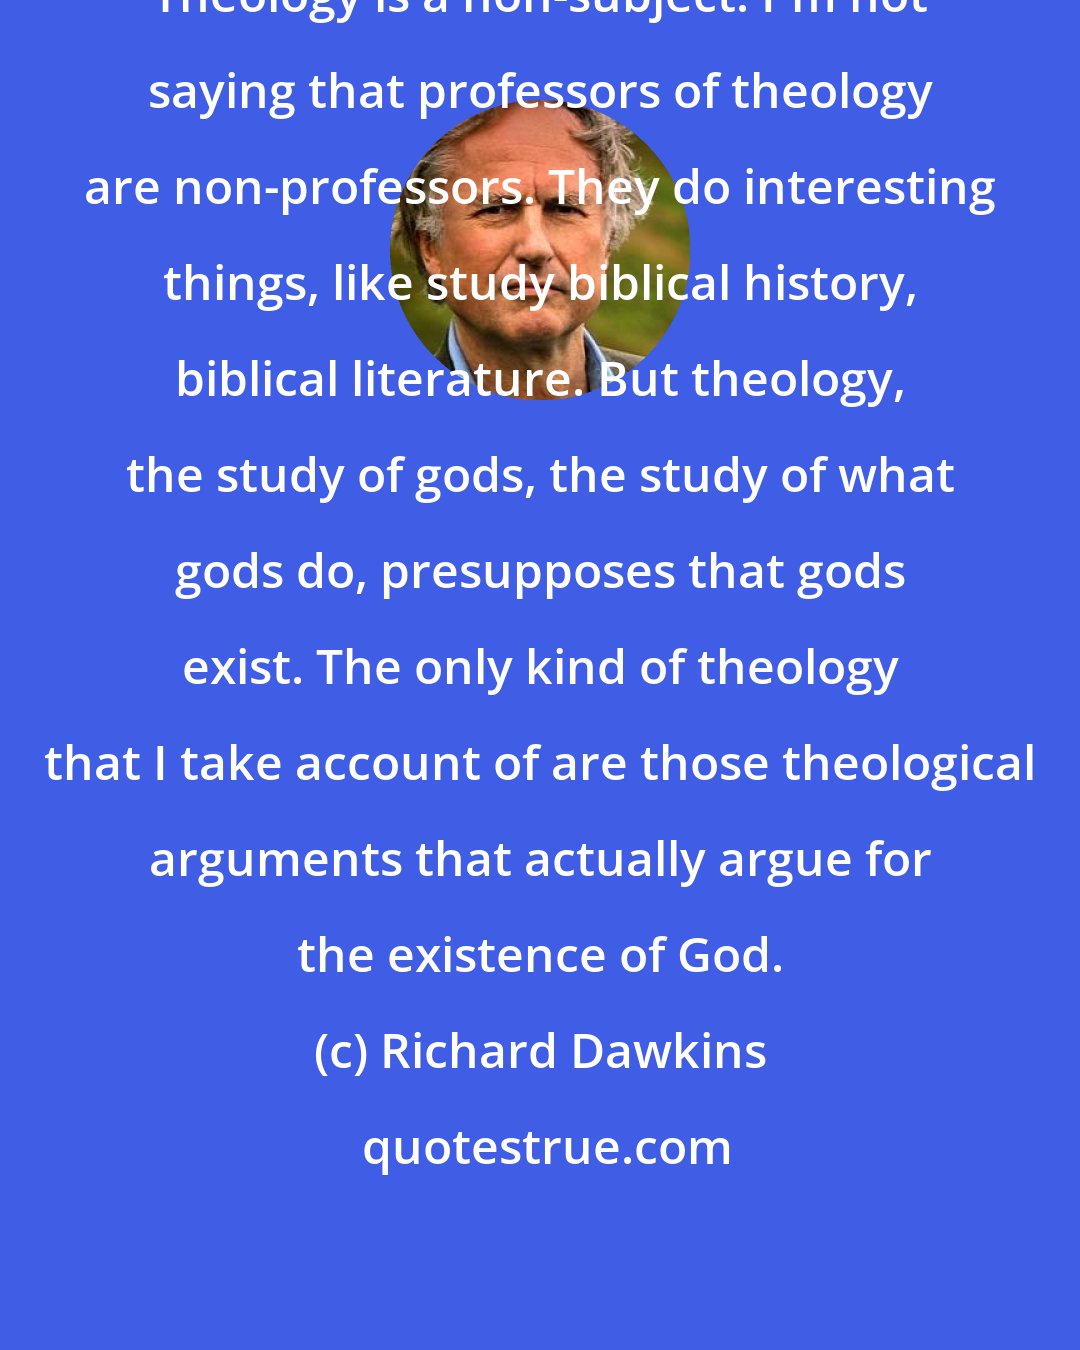 Richard Dawkins: Theology is a non-subject. I'm not saying that professors of theology are non-professors. They do interesting things, like study biblical history, biblical literature. But theology, the study of gods, the study of what gods do, presupposes that gods exist. The only kind of theology that I take account of are those theological arguments that actually argue for the existence of God.